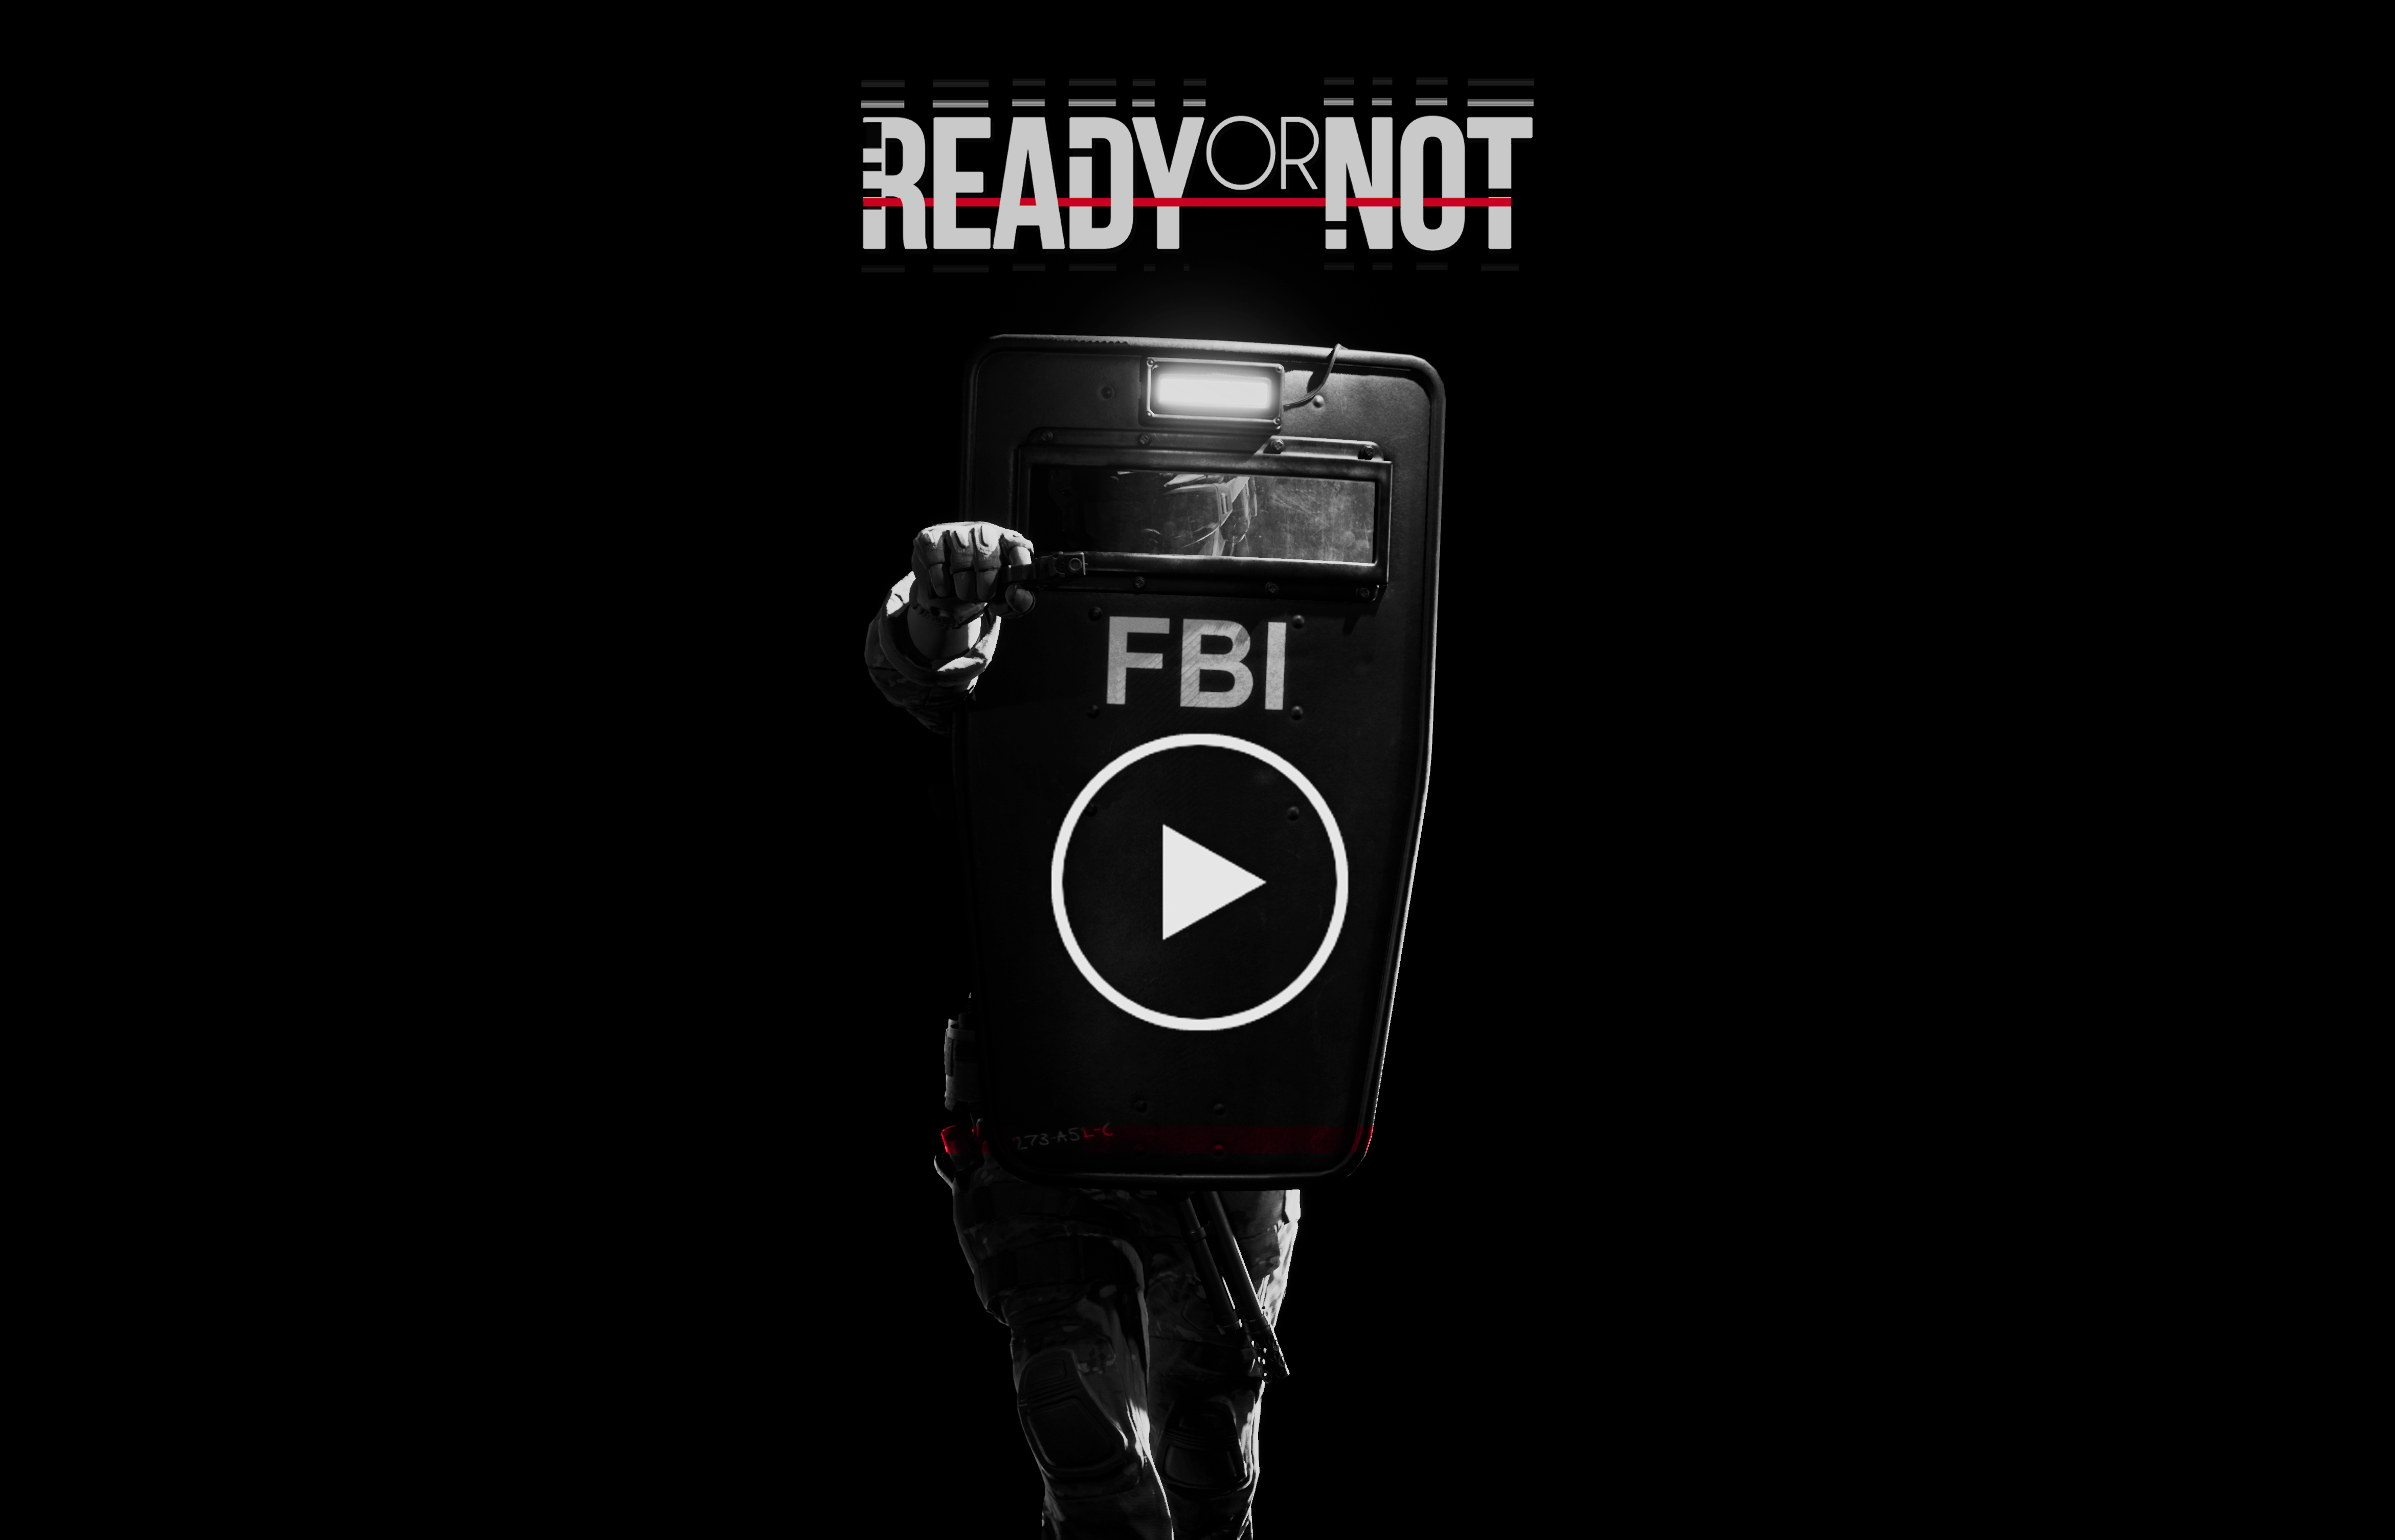 Click the image above to listen to a snippet of Ready Or Not's original soundtrack.